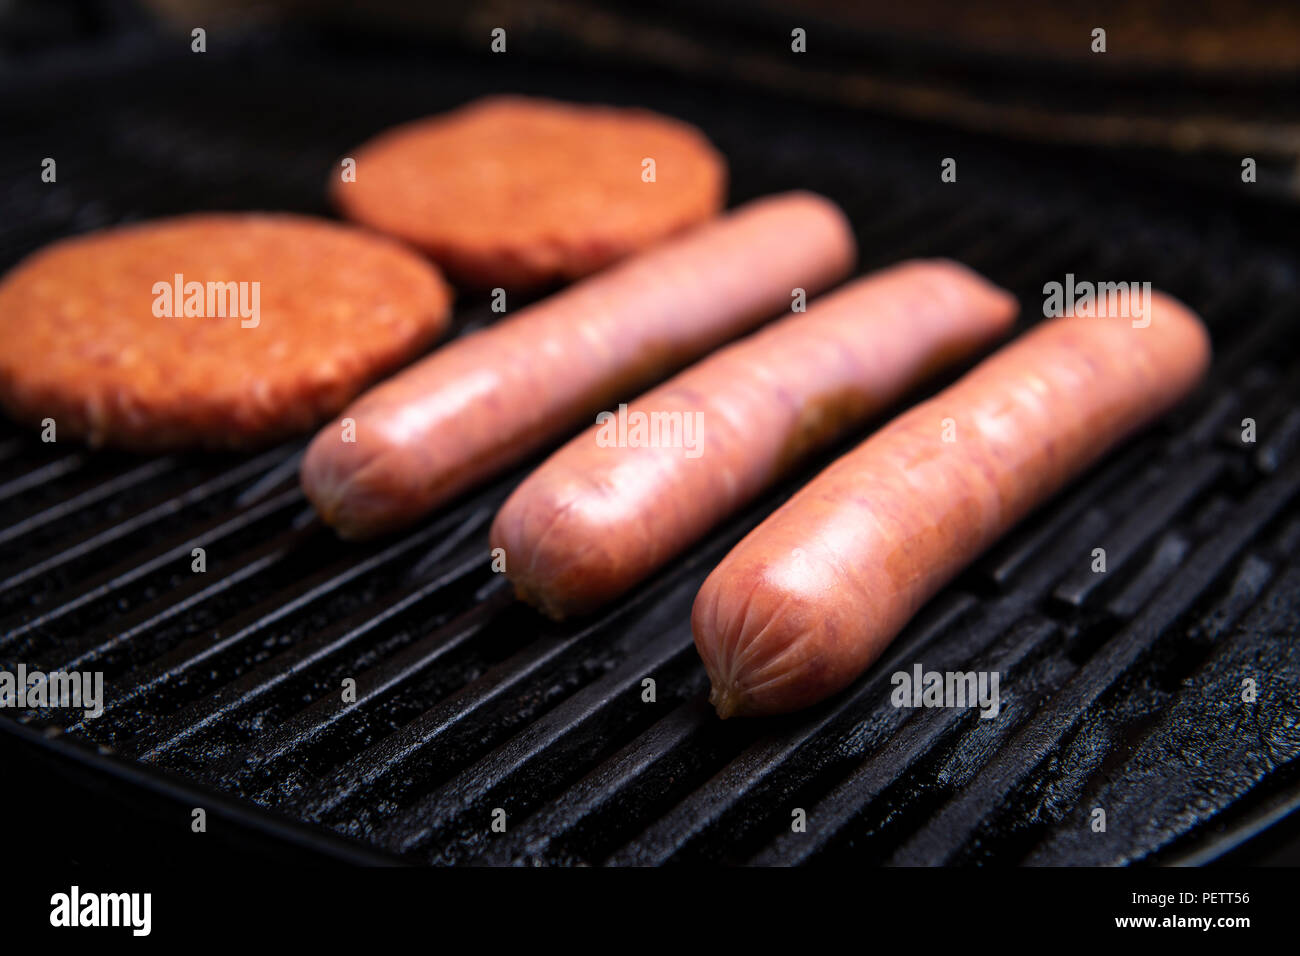 Fresh uncooked barbecue sausages, burgers and bread ready to be grilled, sitting on a grill Stock Photo